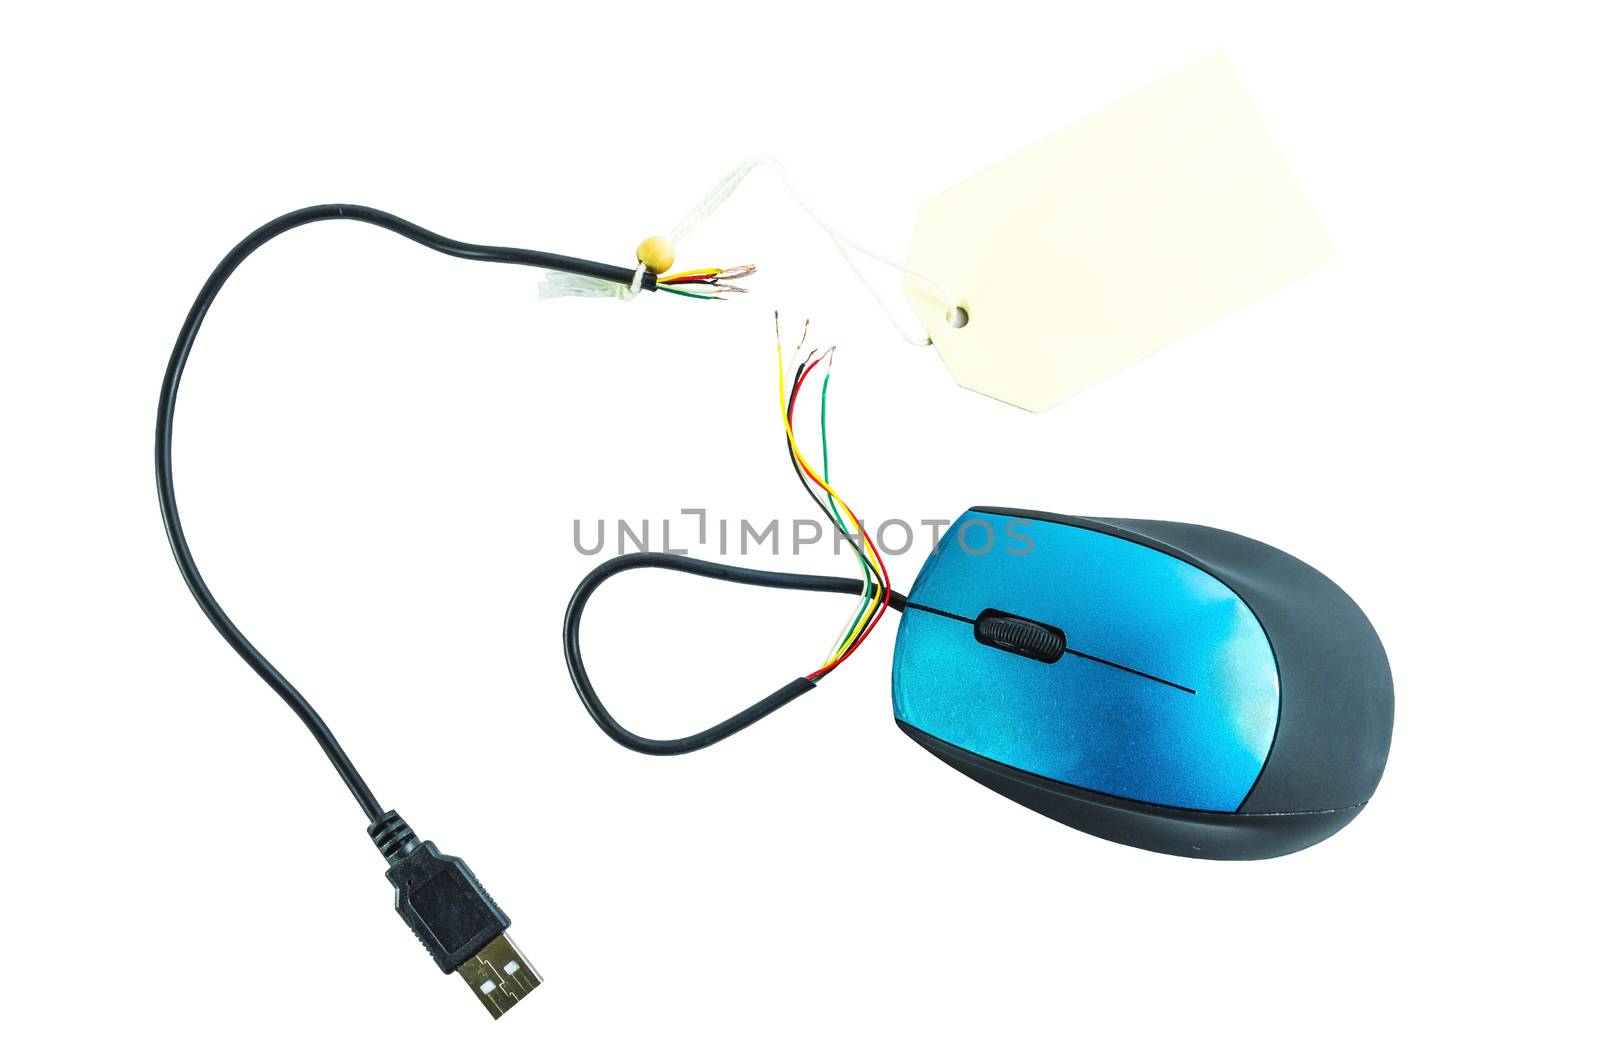 Mouse with broken cable with text box